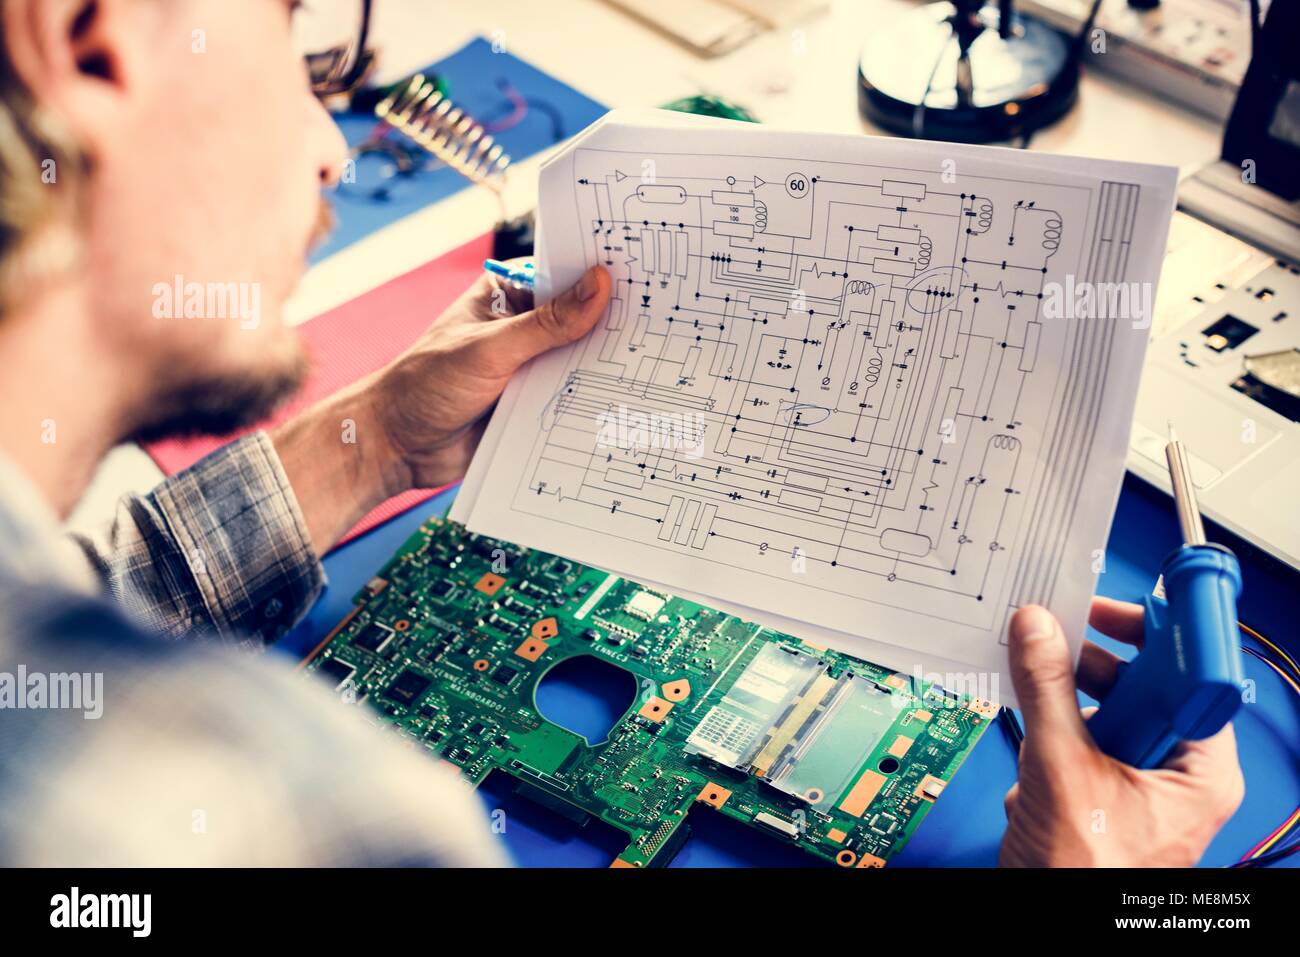 Technician studying electronics circuit guideline paper Stock Photo